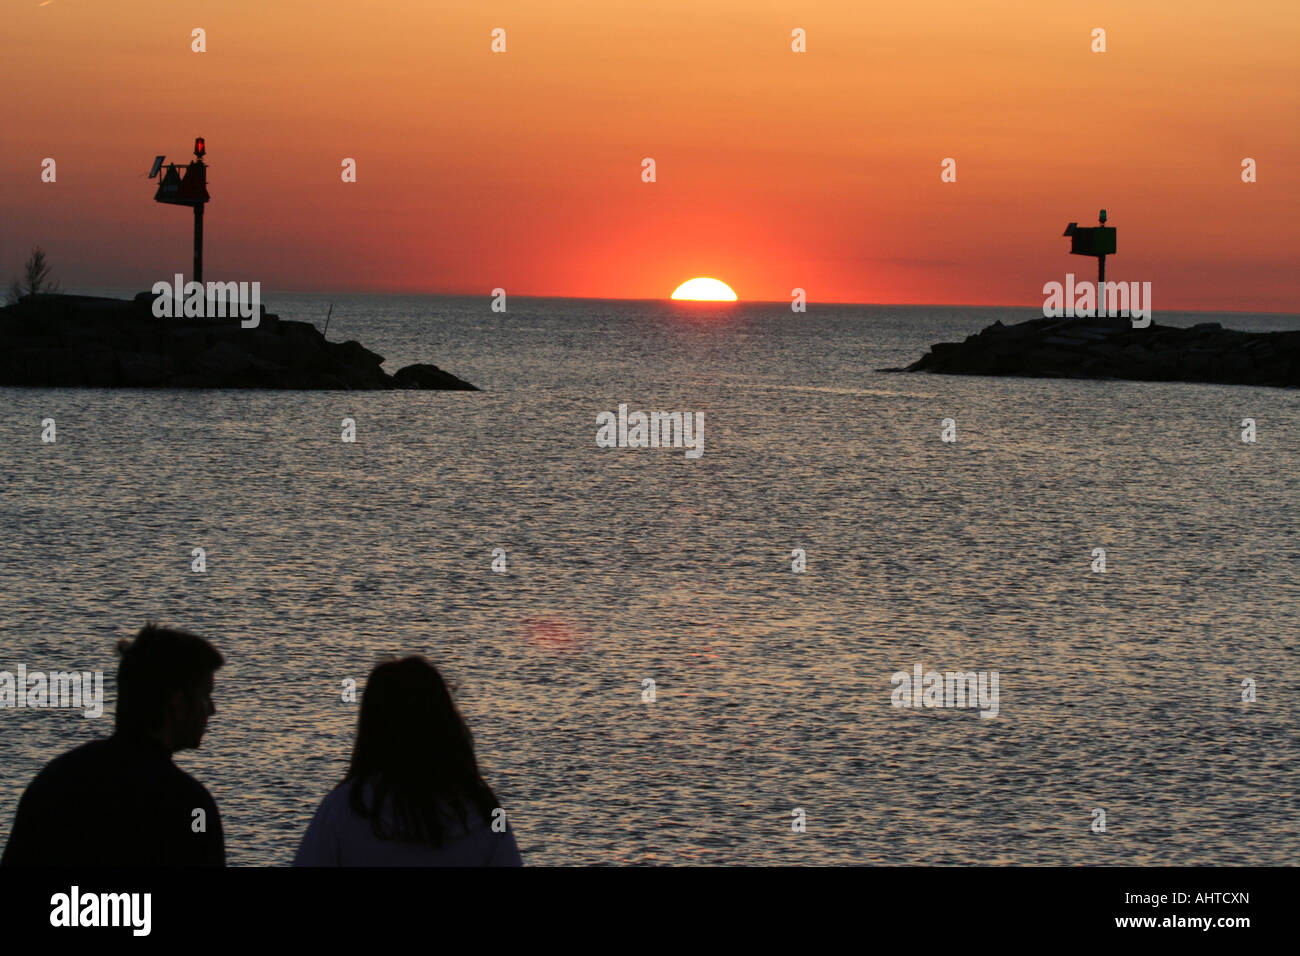 Couple with their back turned away from the camera, watching a beautiful sunset over a harbor Stock Photo